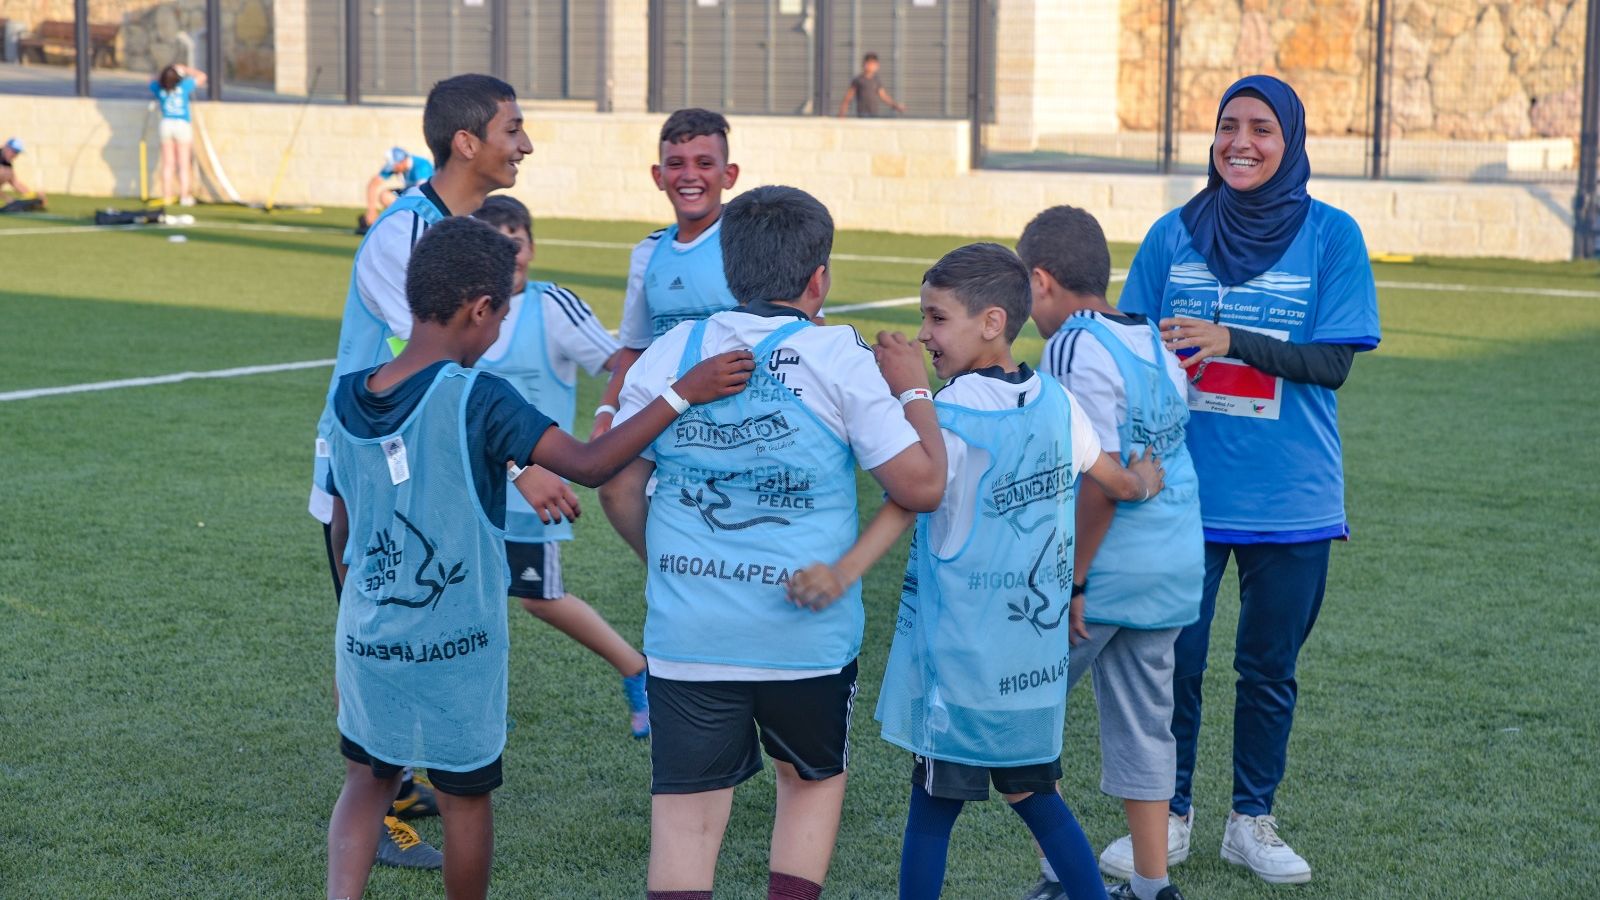 Children of Jewish and Arab heritage playing together at Sporting in the Service of Peace. Photo by Ilan Hadar